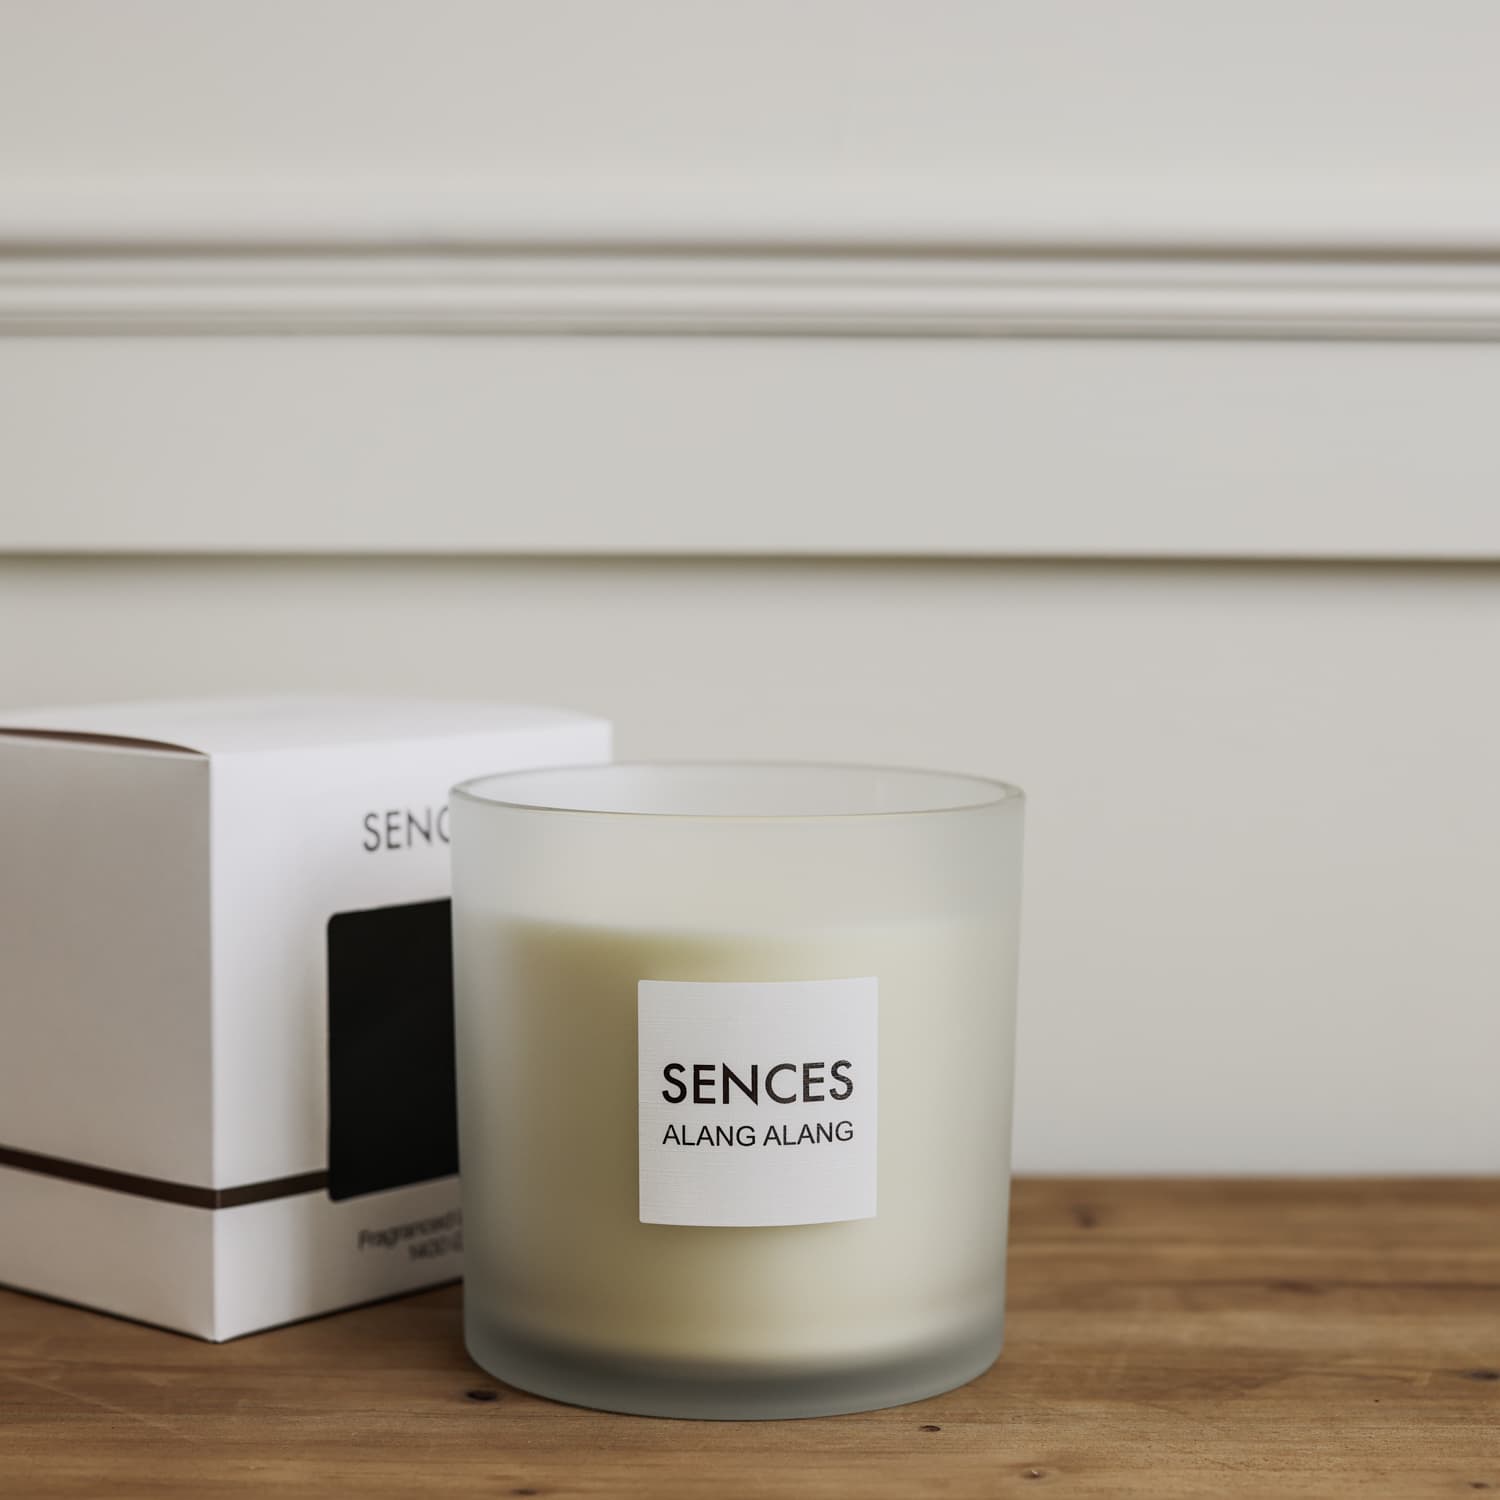 Sences Alang Alang White three wick candle in frosted glass on wooden table with presentation box.